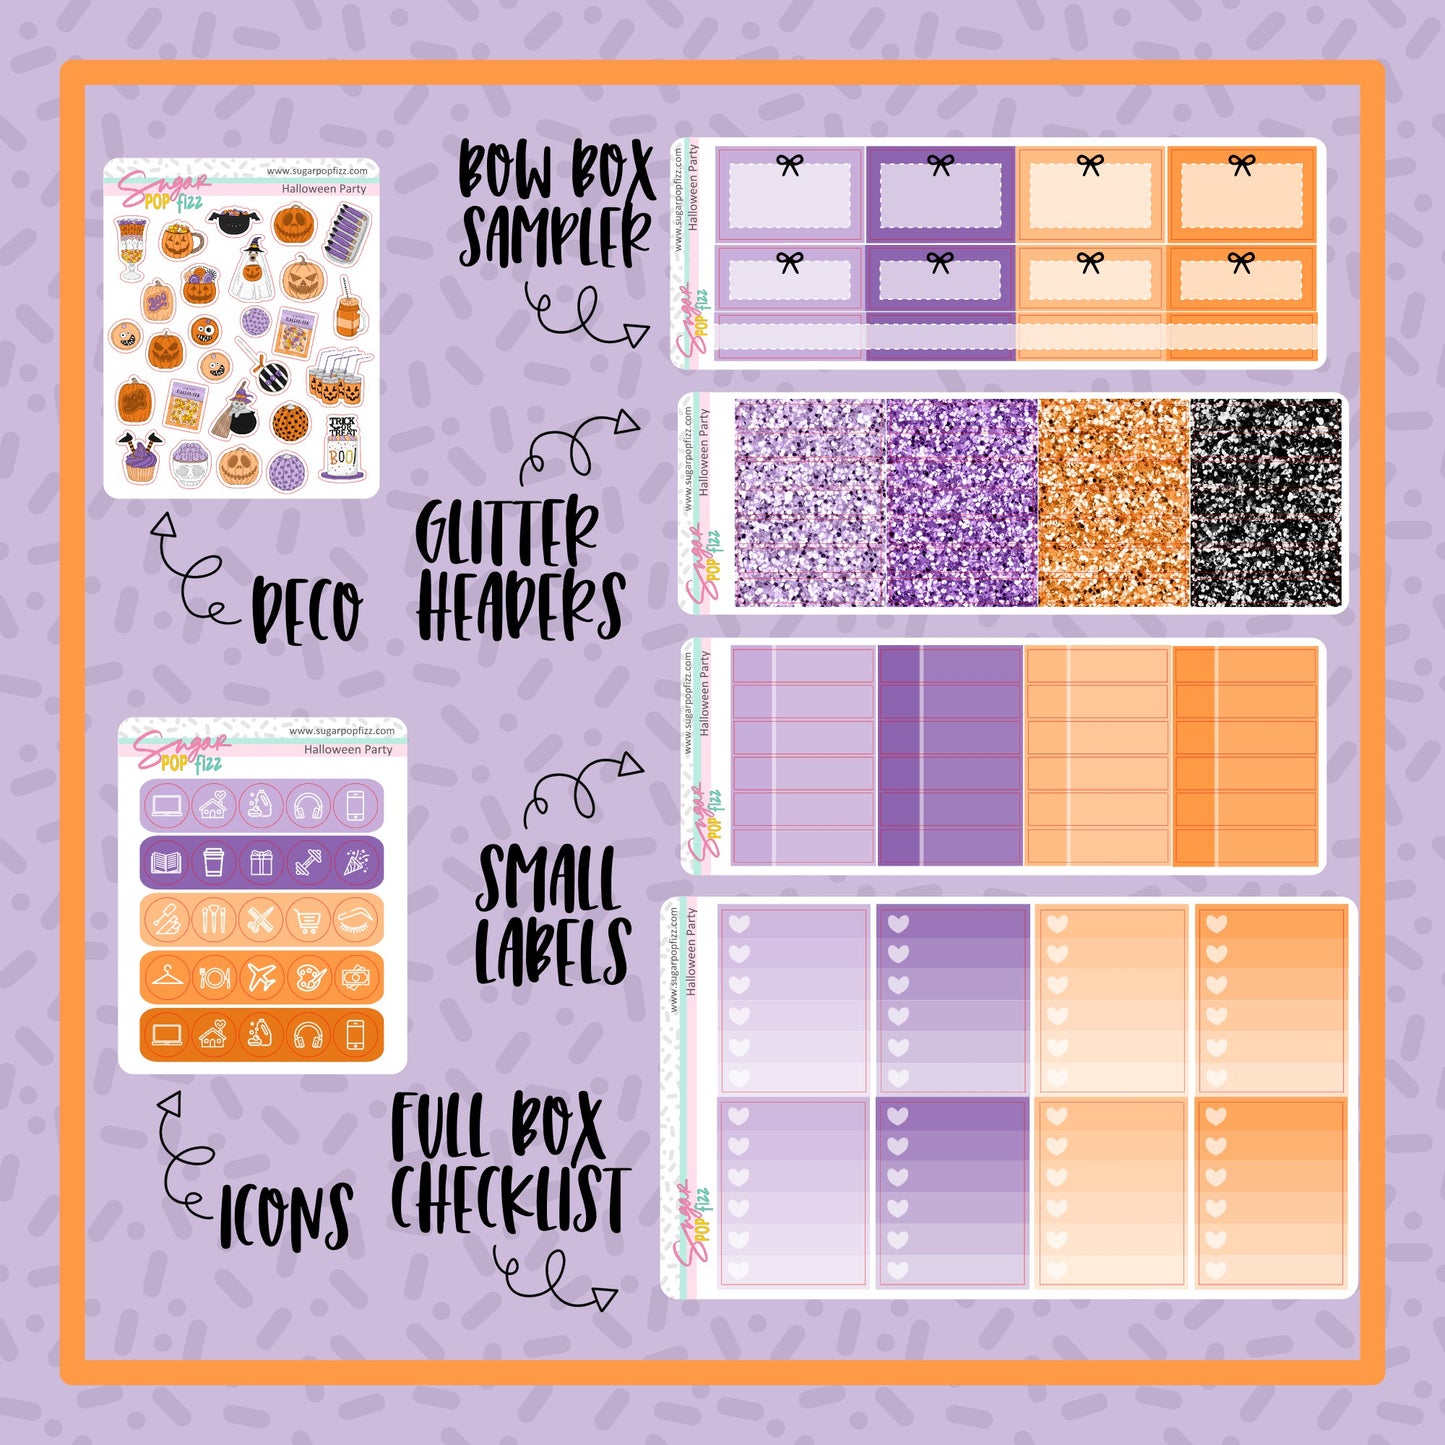 Halloween Party Weekly Kit Add-ons